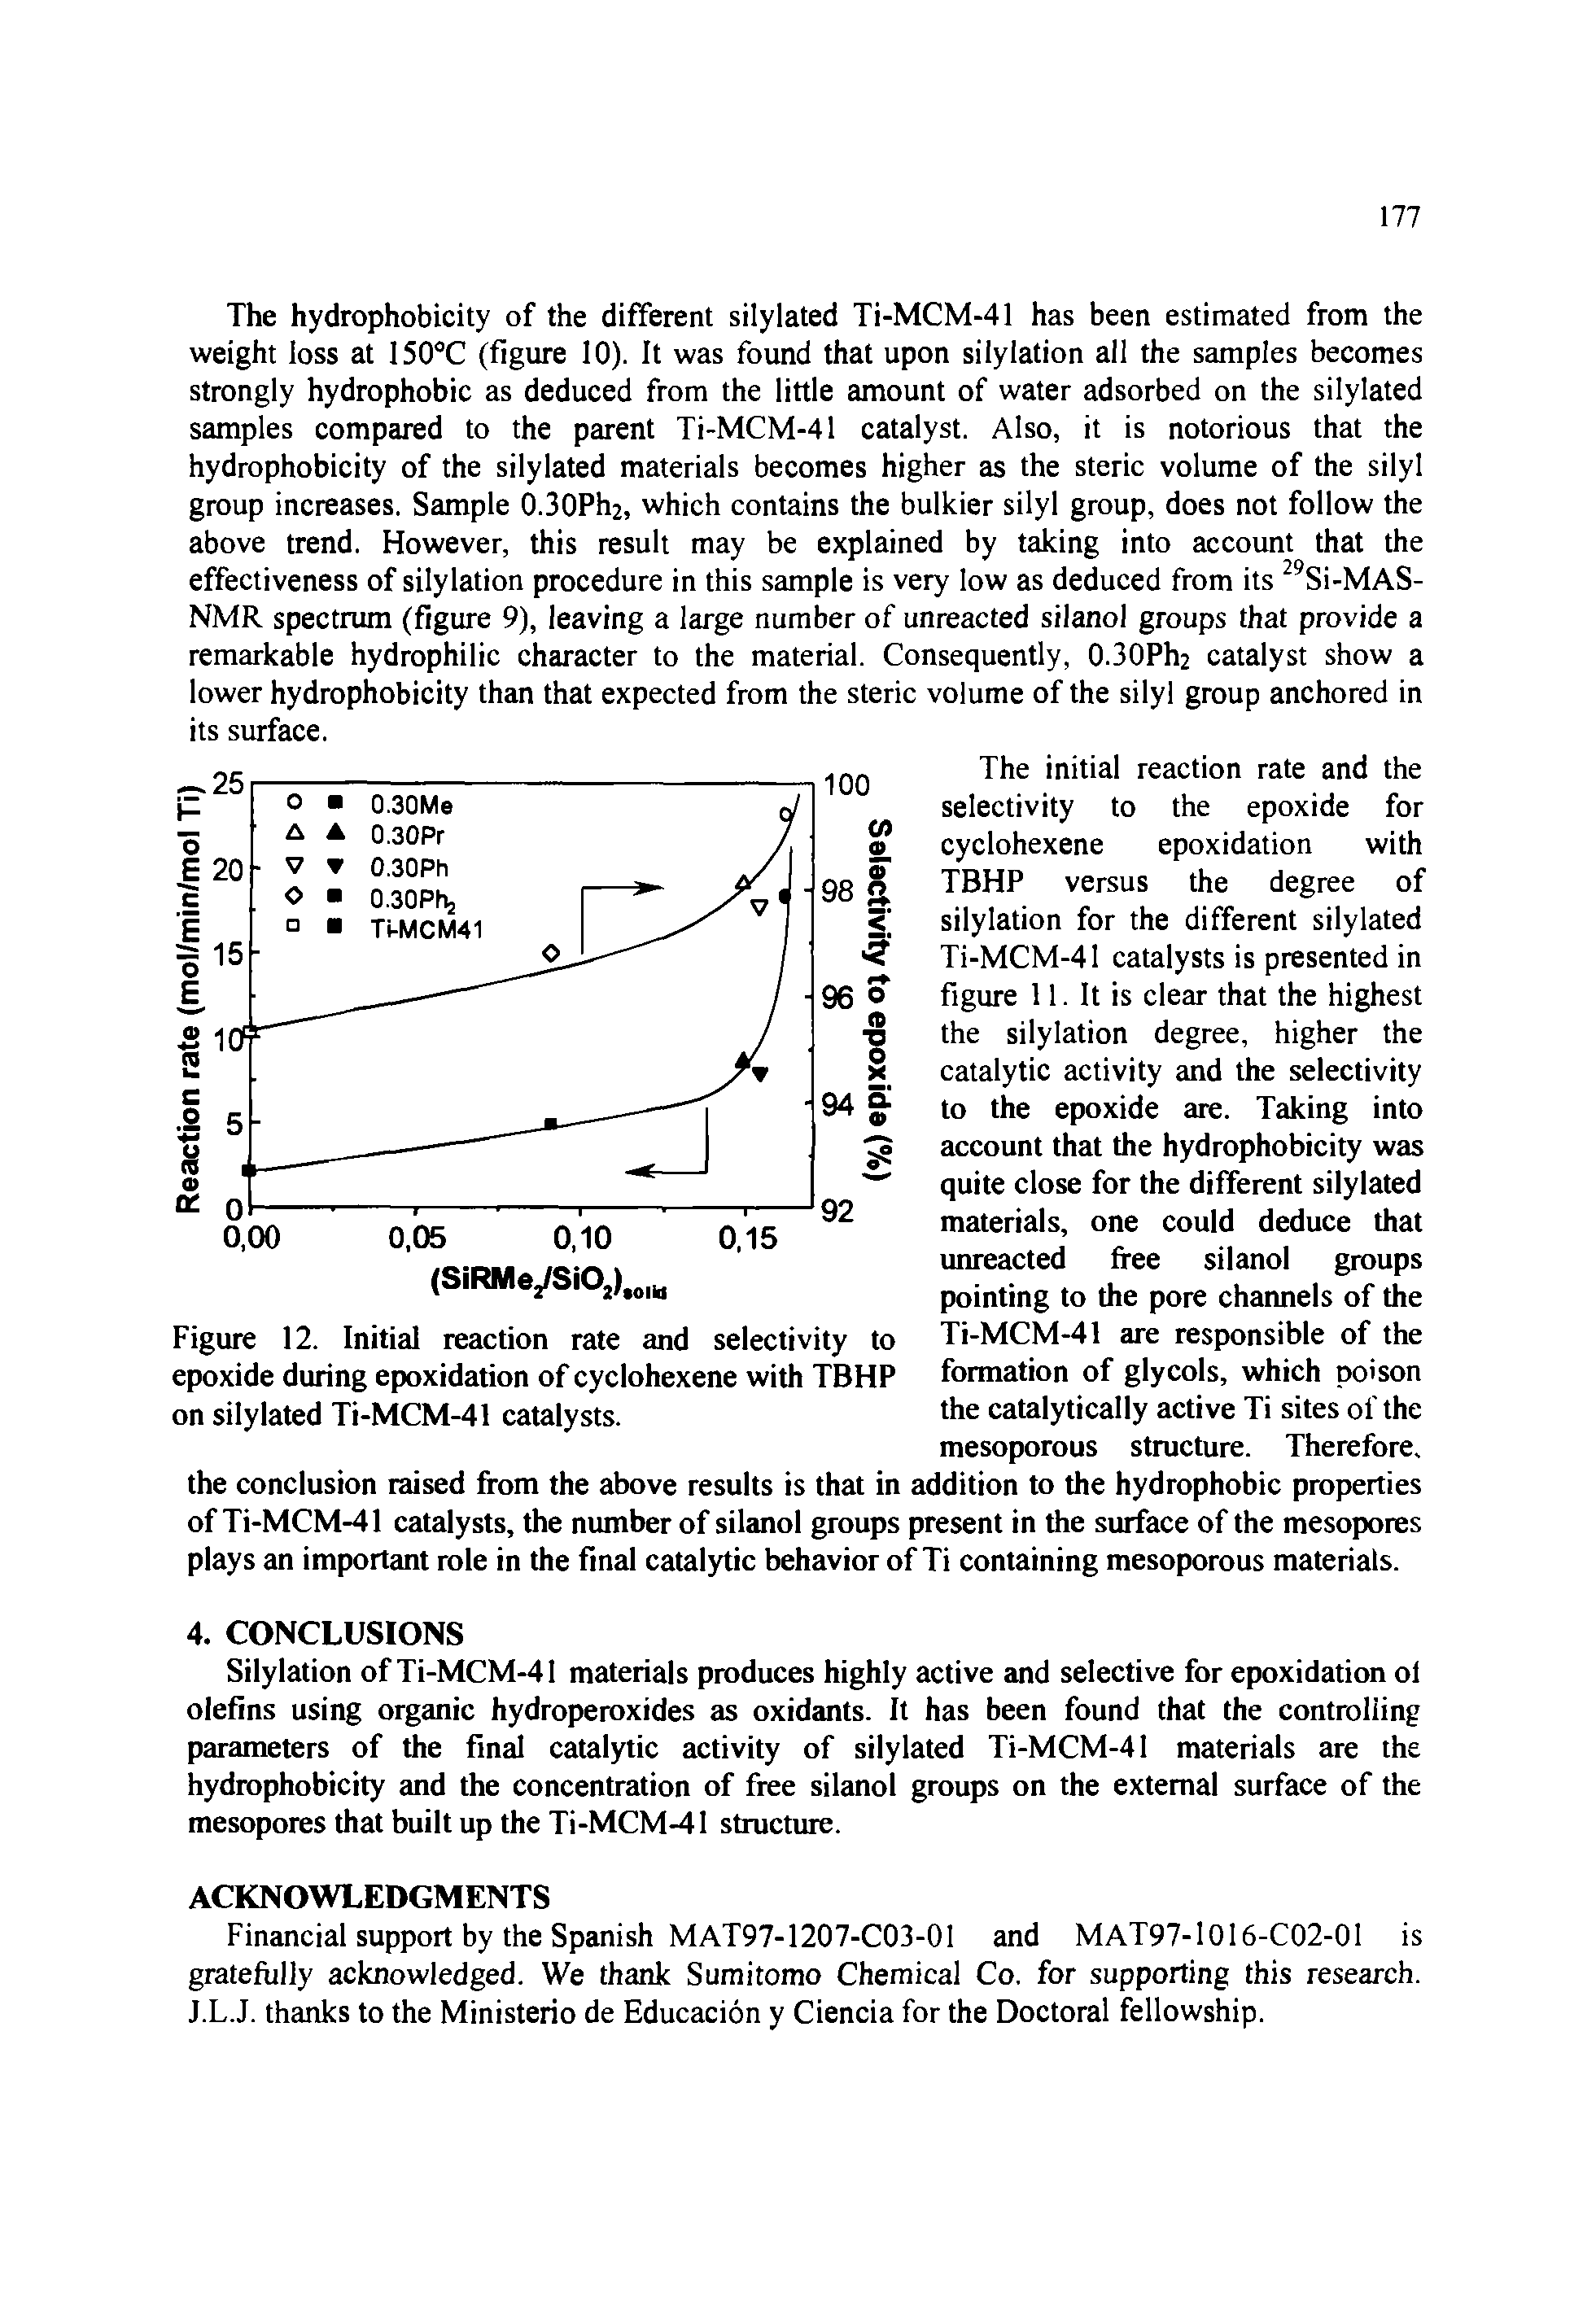 Figure 12. Initial reaction rate and selectivity to epoxide during epoxidation of cyclohexene with TBHP on silylated Ti-MCM-41 catalysts.